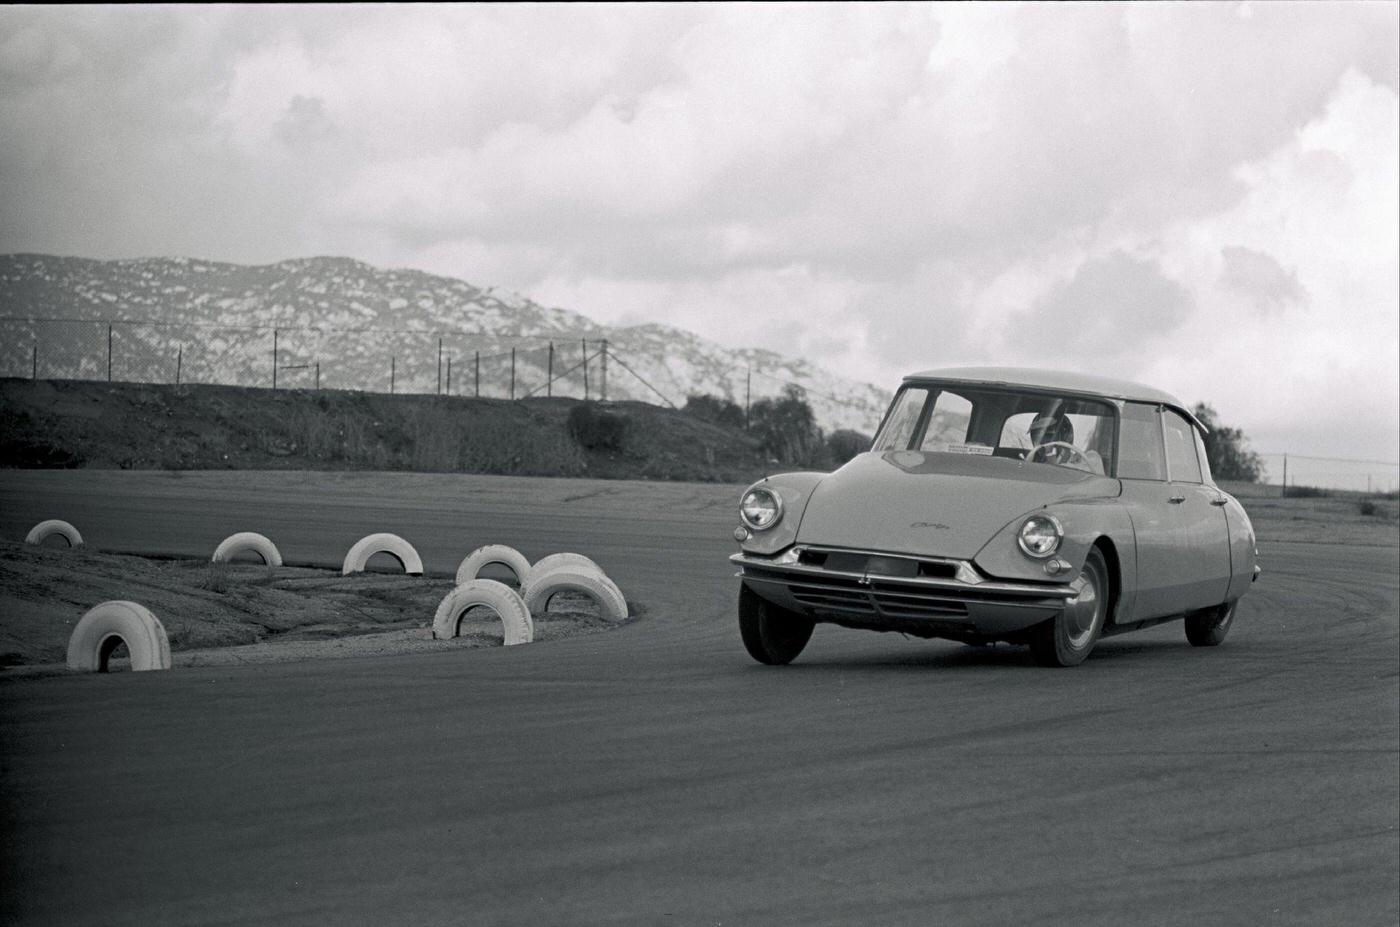 A road test of the 1959 Citroën DS-19, known for its handling and driving characteristics